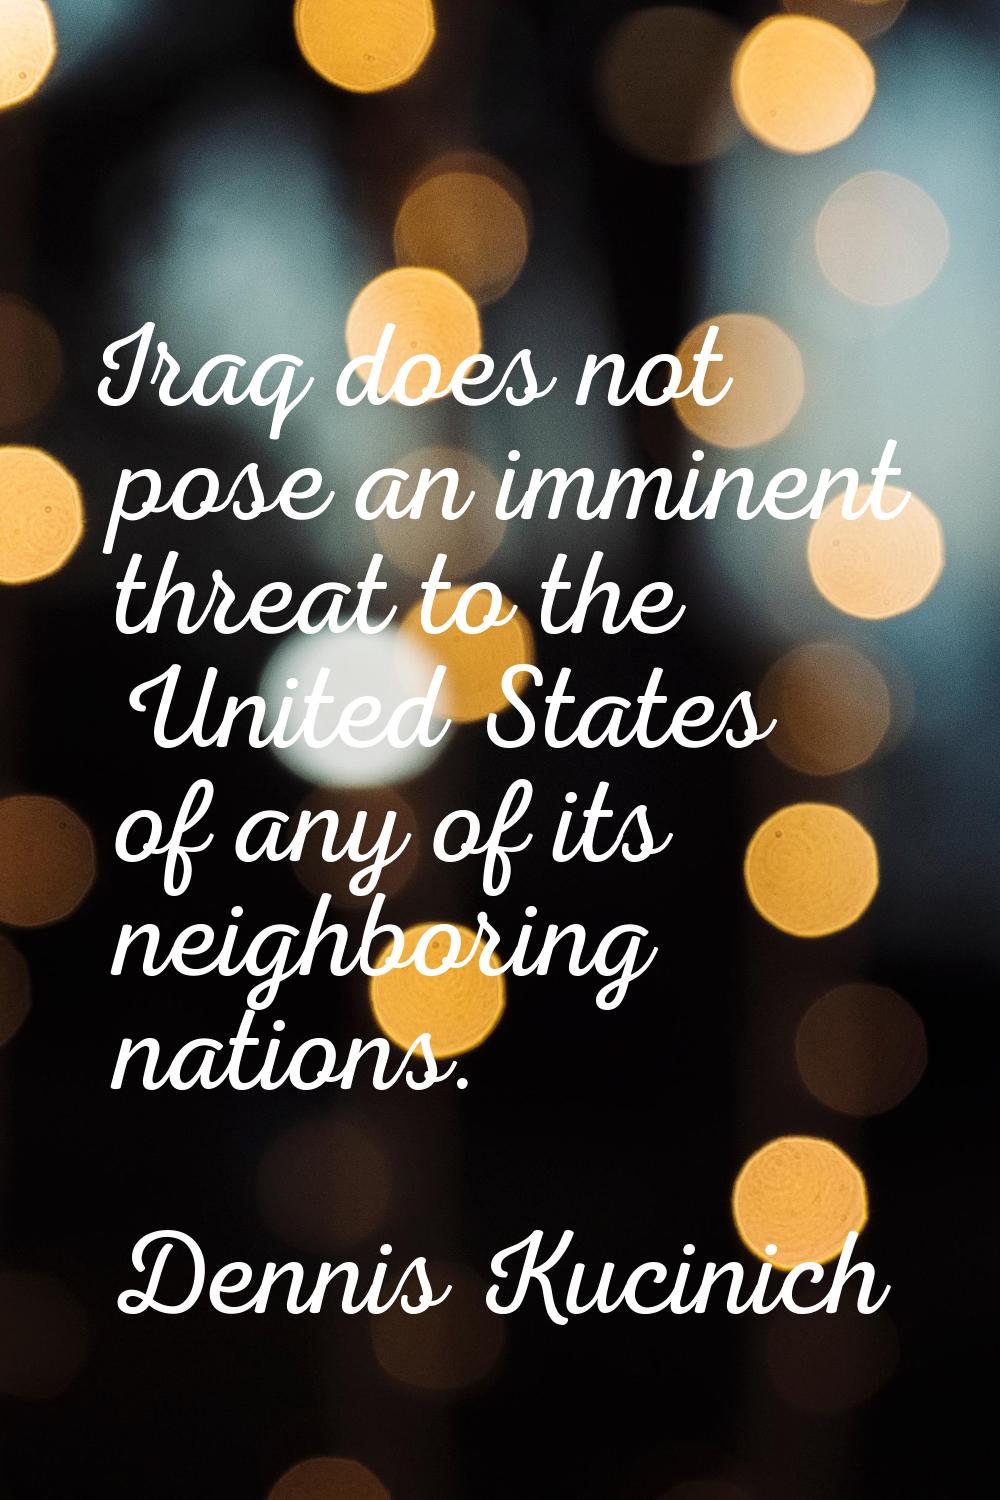 Iraq does not pose an imminent threat to the United States of any of its neighboring nations.